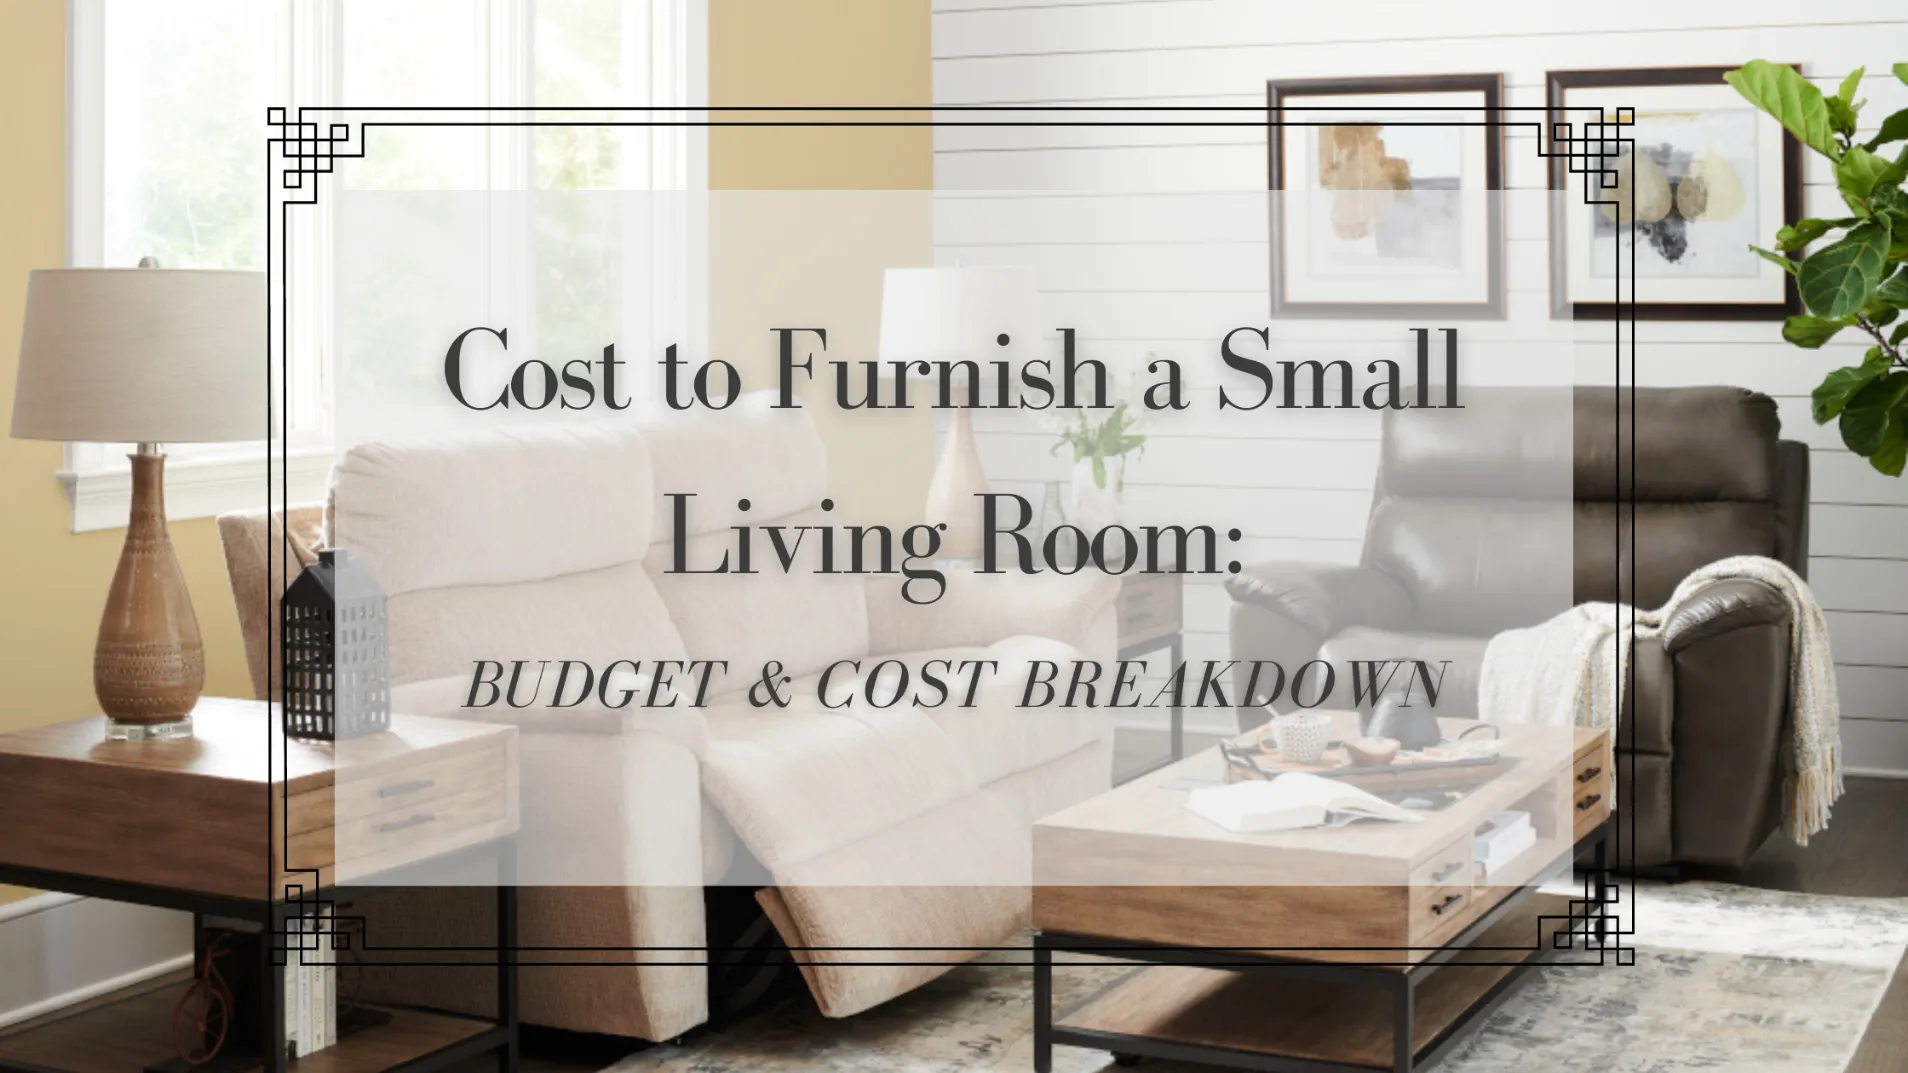 Cost to Furnish a Small Living Room: Budget & Cost Breakdown